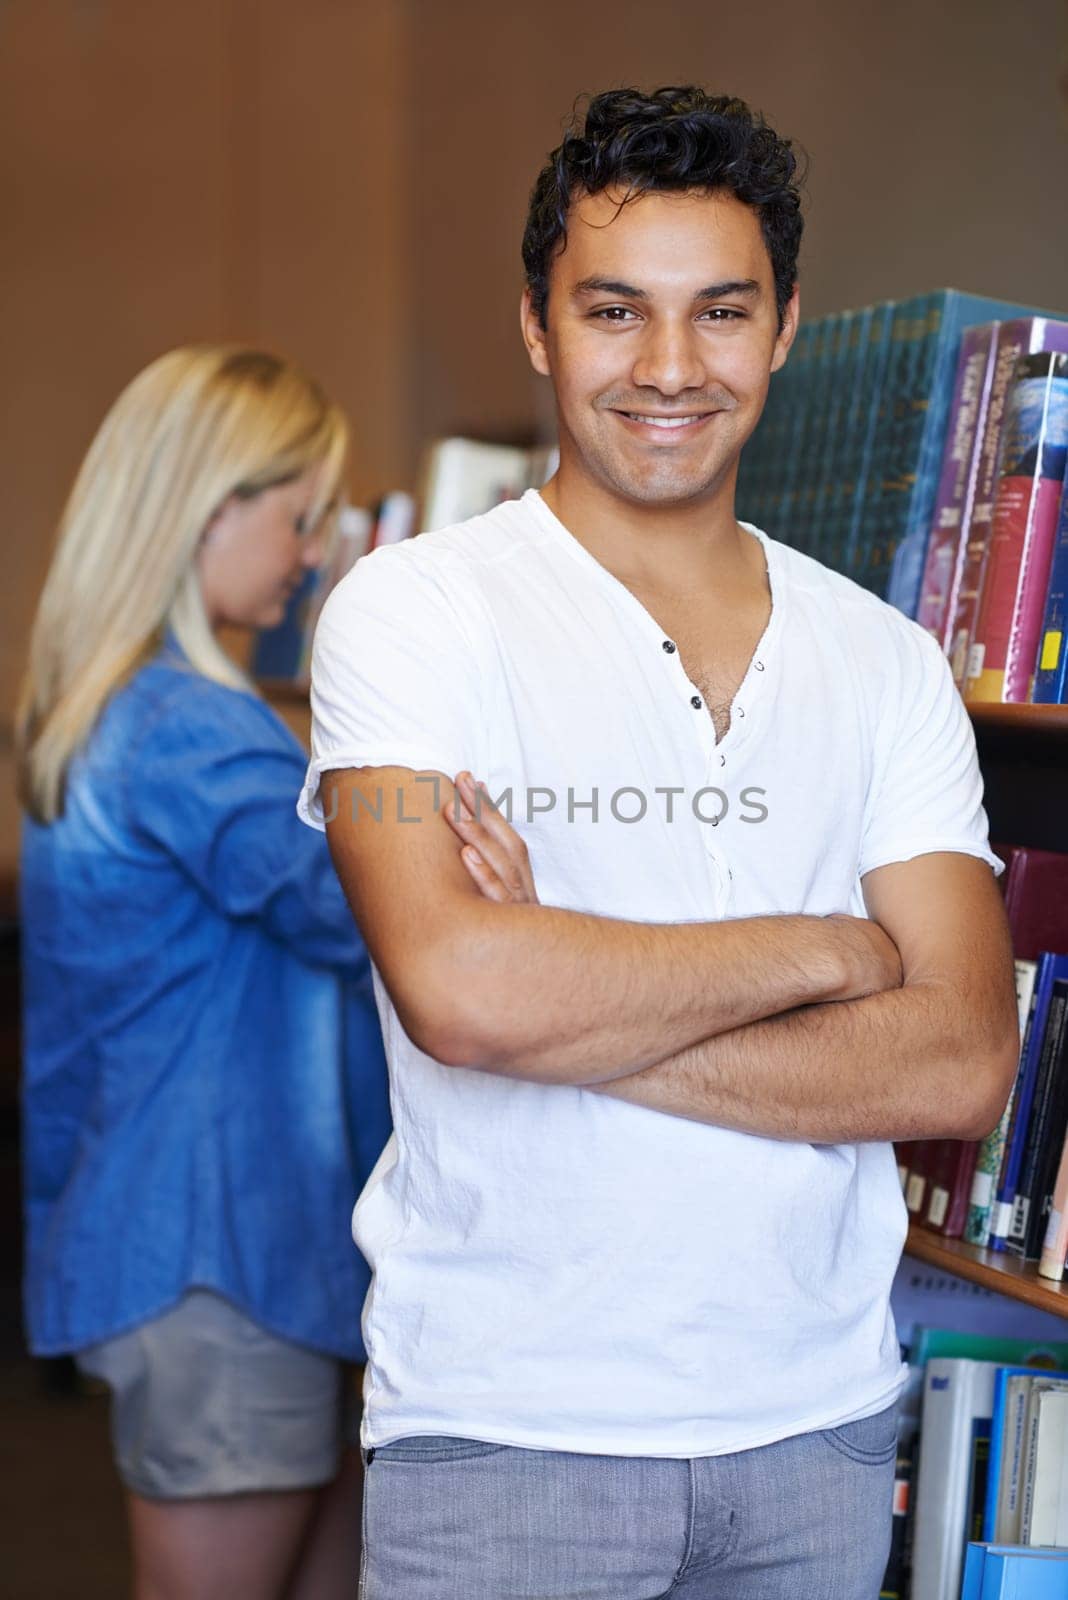 Portrait, arms crossed or happy man in a library for knowledge or development for future growth. Scholarship, education or male student with smile or pride for studying or learning in college campus.